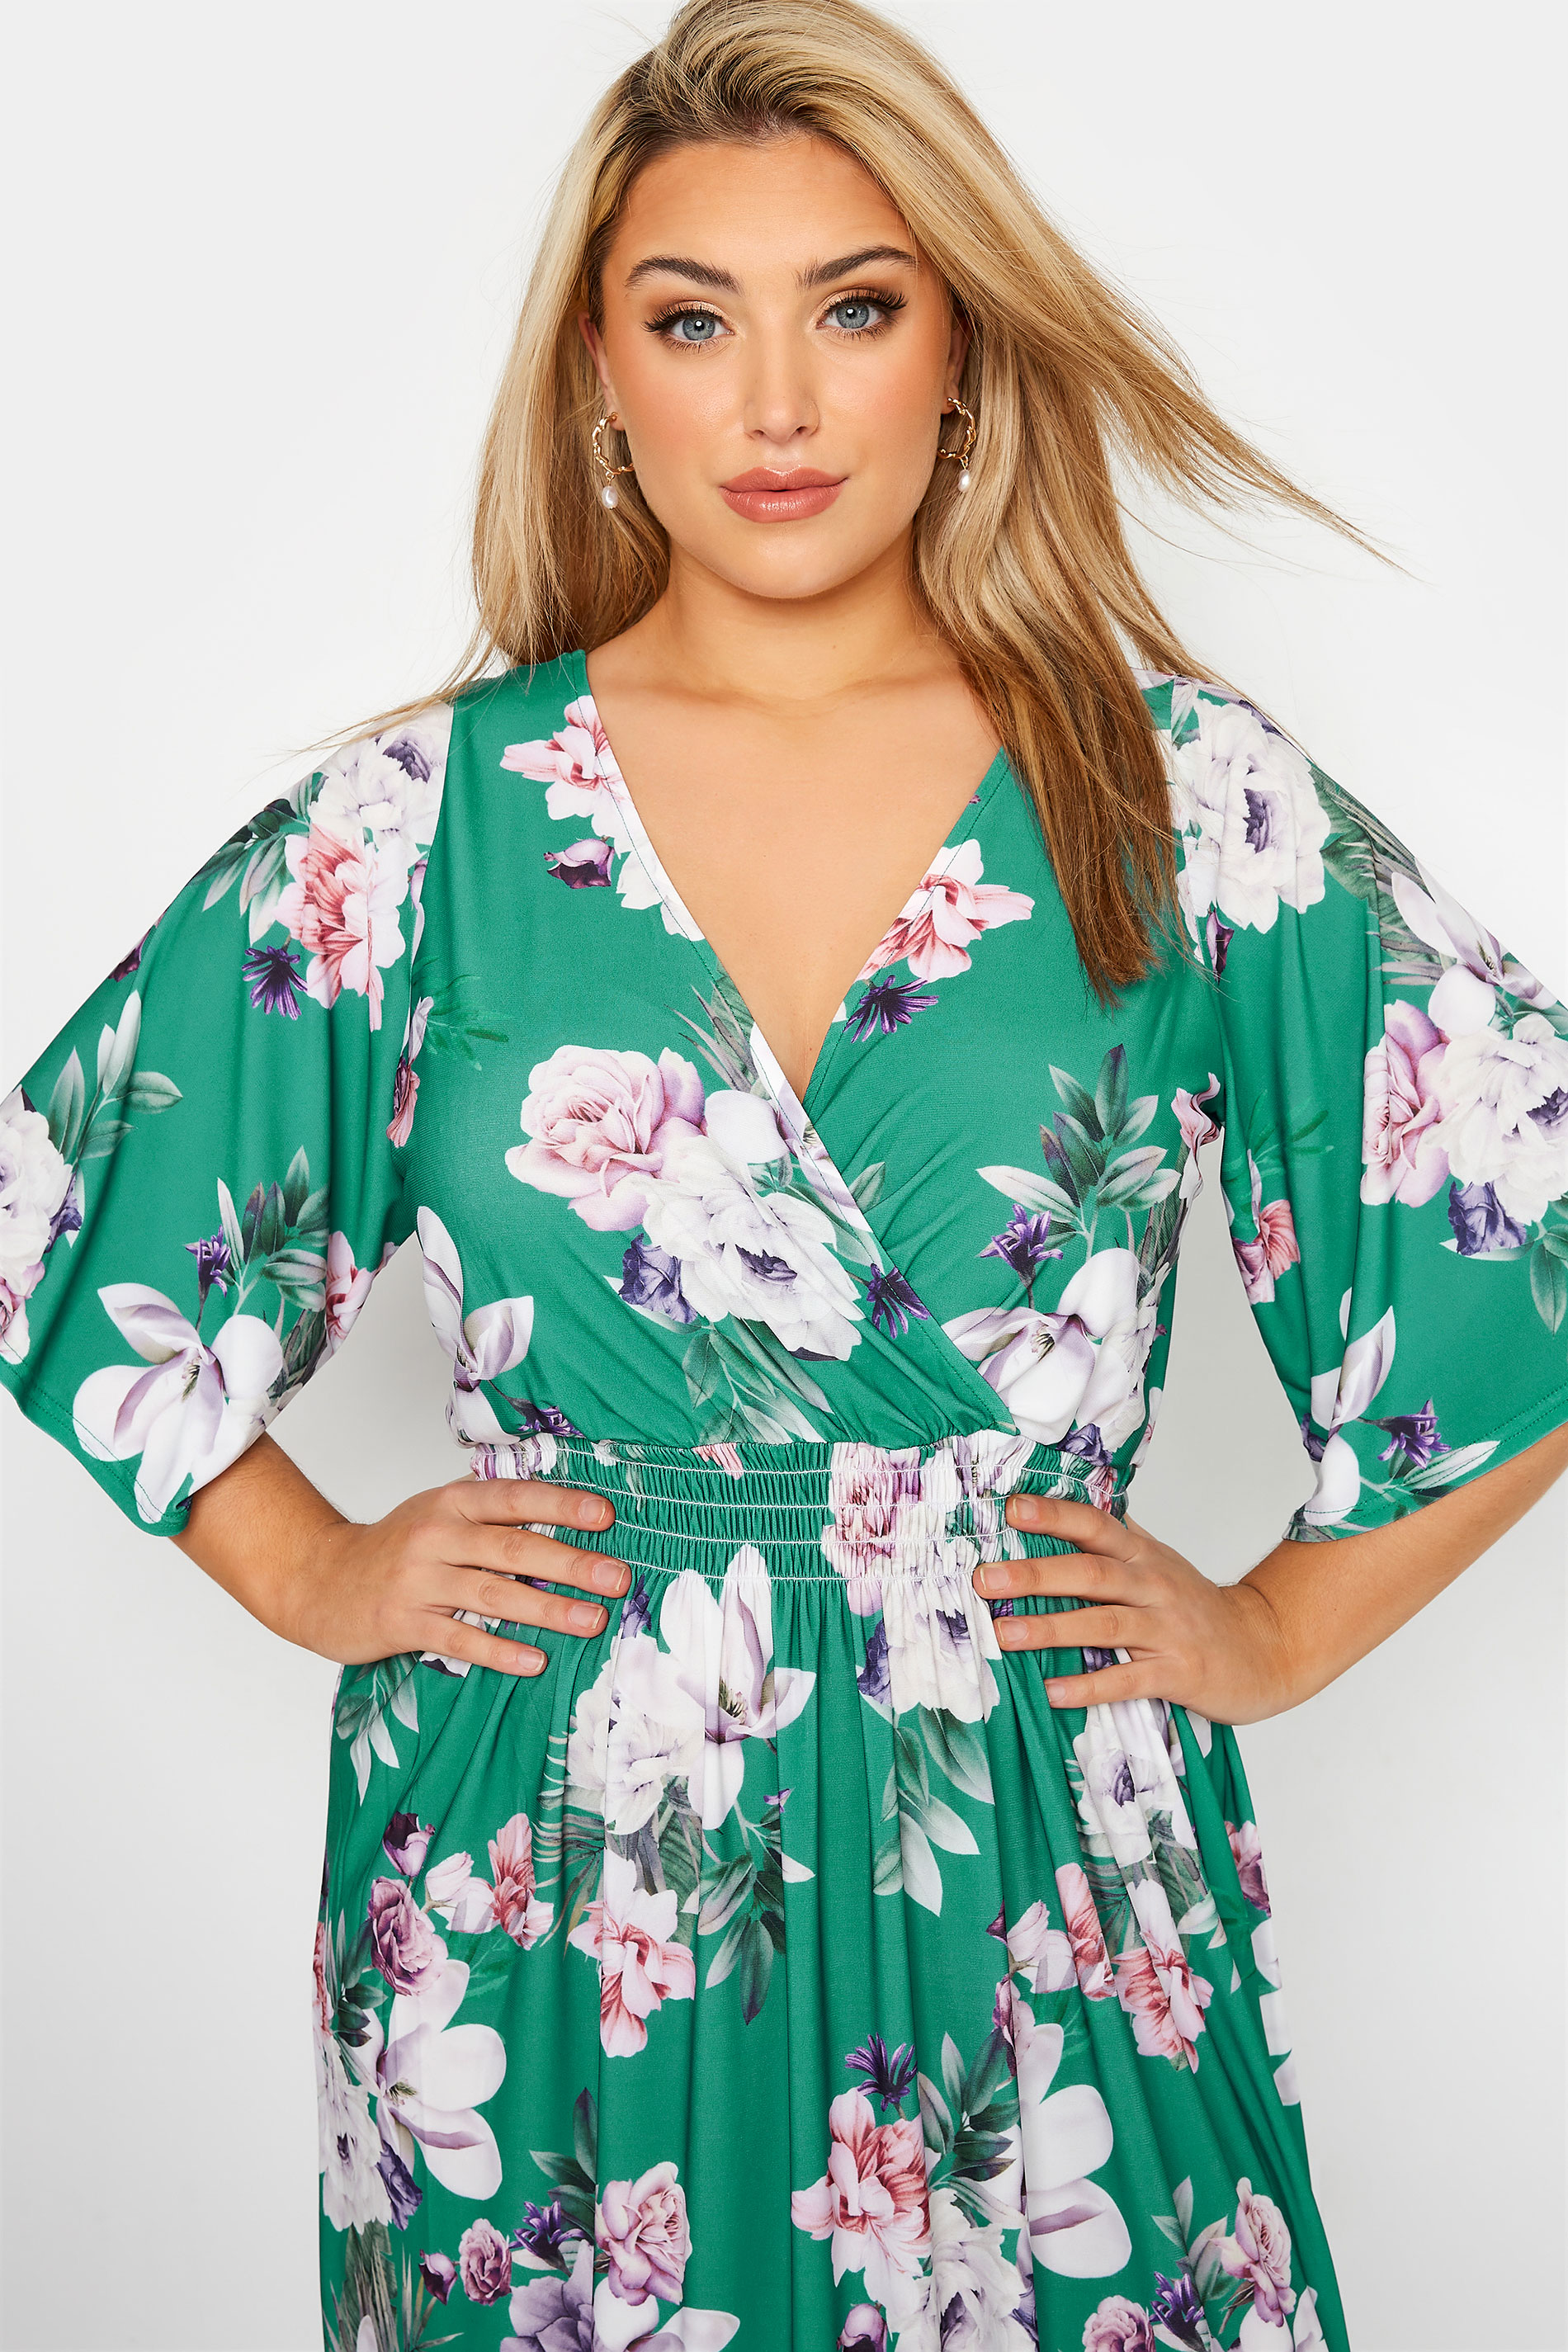 Robes Grande Taille Grande taille  Robes Longues | YOURS LONDON - Robe Cache-Coeur Floral Verte Maxi - UM21685